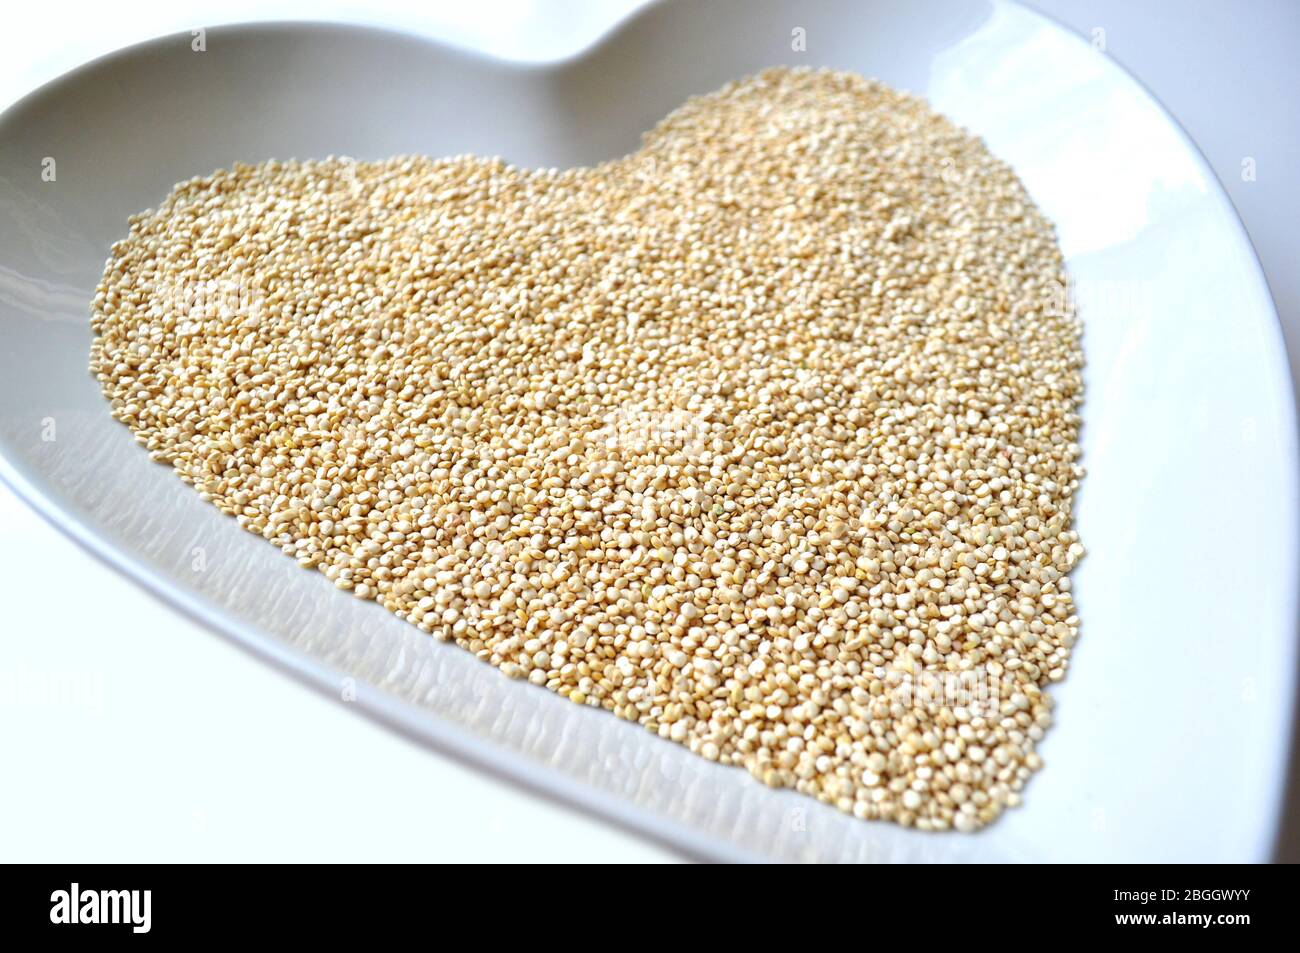 Organic gluten free quinoa grain in a heart shaped bowl on white with copy space Stock Photo